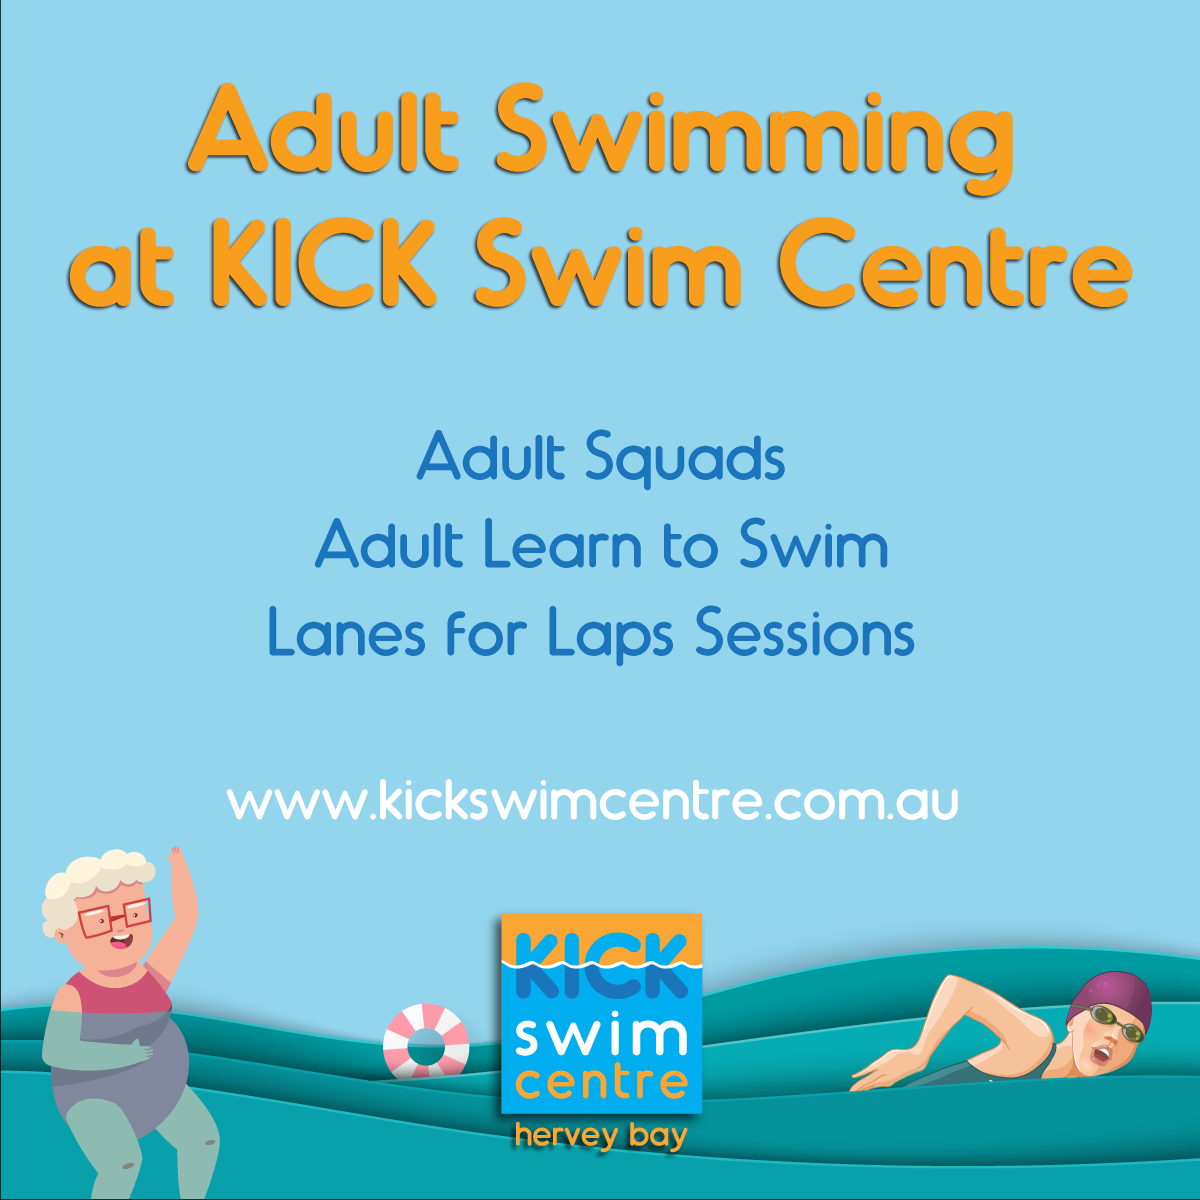 Adult Swimming
Adult Squads, Adult Learn to Swim, Lanes for Laps